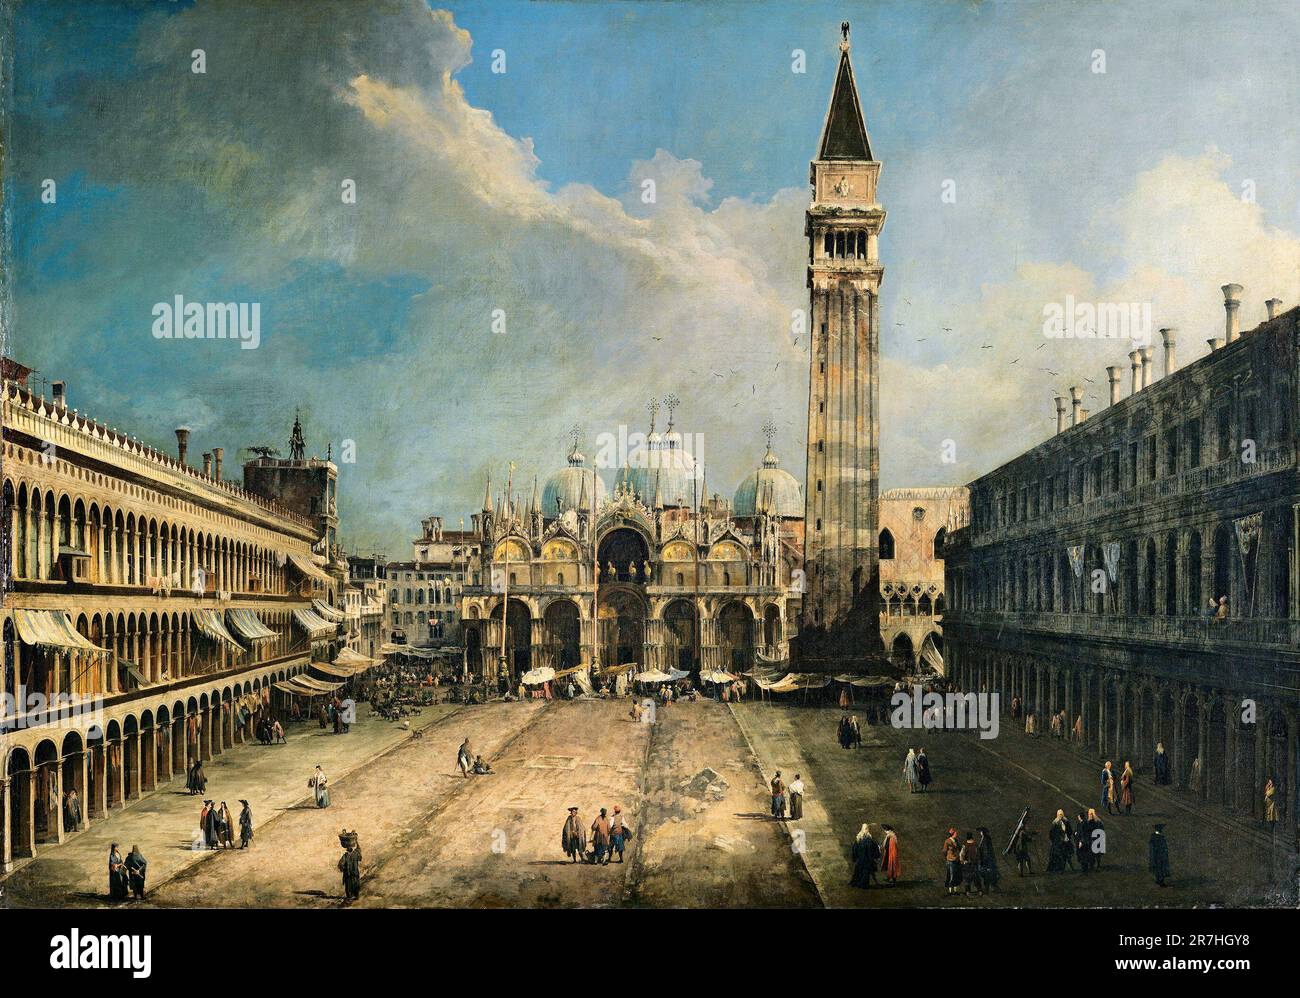 Saint Mark’s Square, Venice  painted by the Venetian painter Giovanni Antonio Canal, commonly known as Canaletto, in 1723 Stock Photo